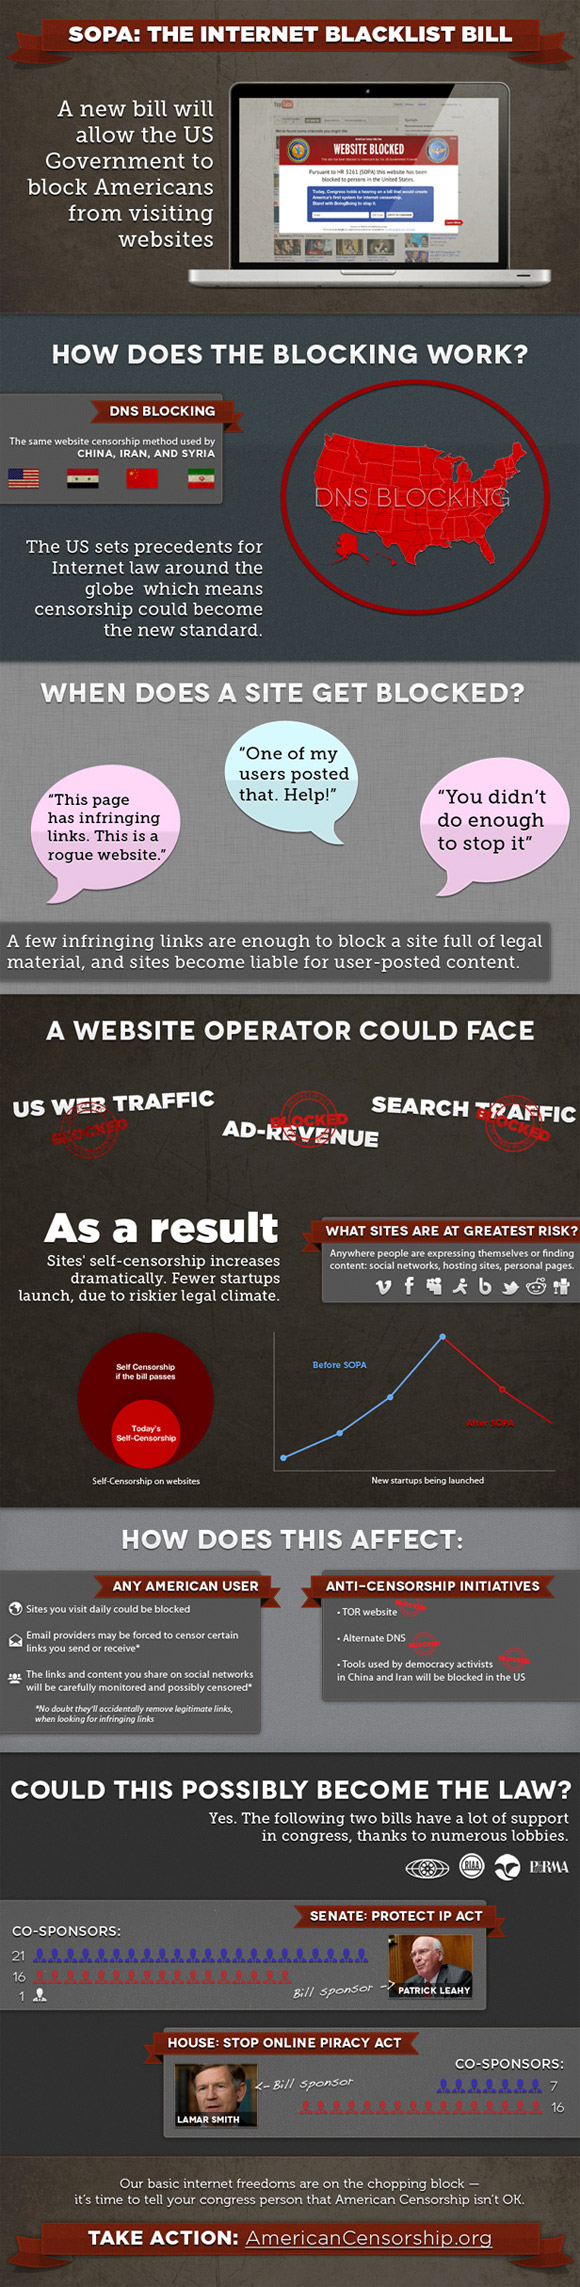 How does SOPA work? Infographic explains how websites will be blocked